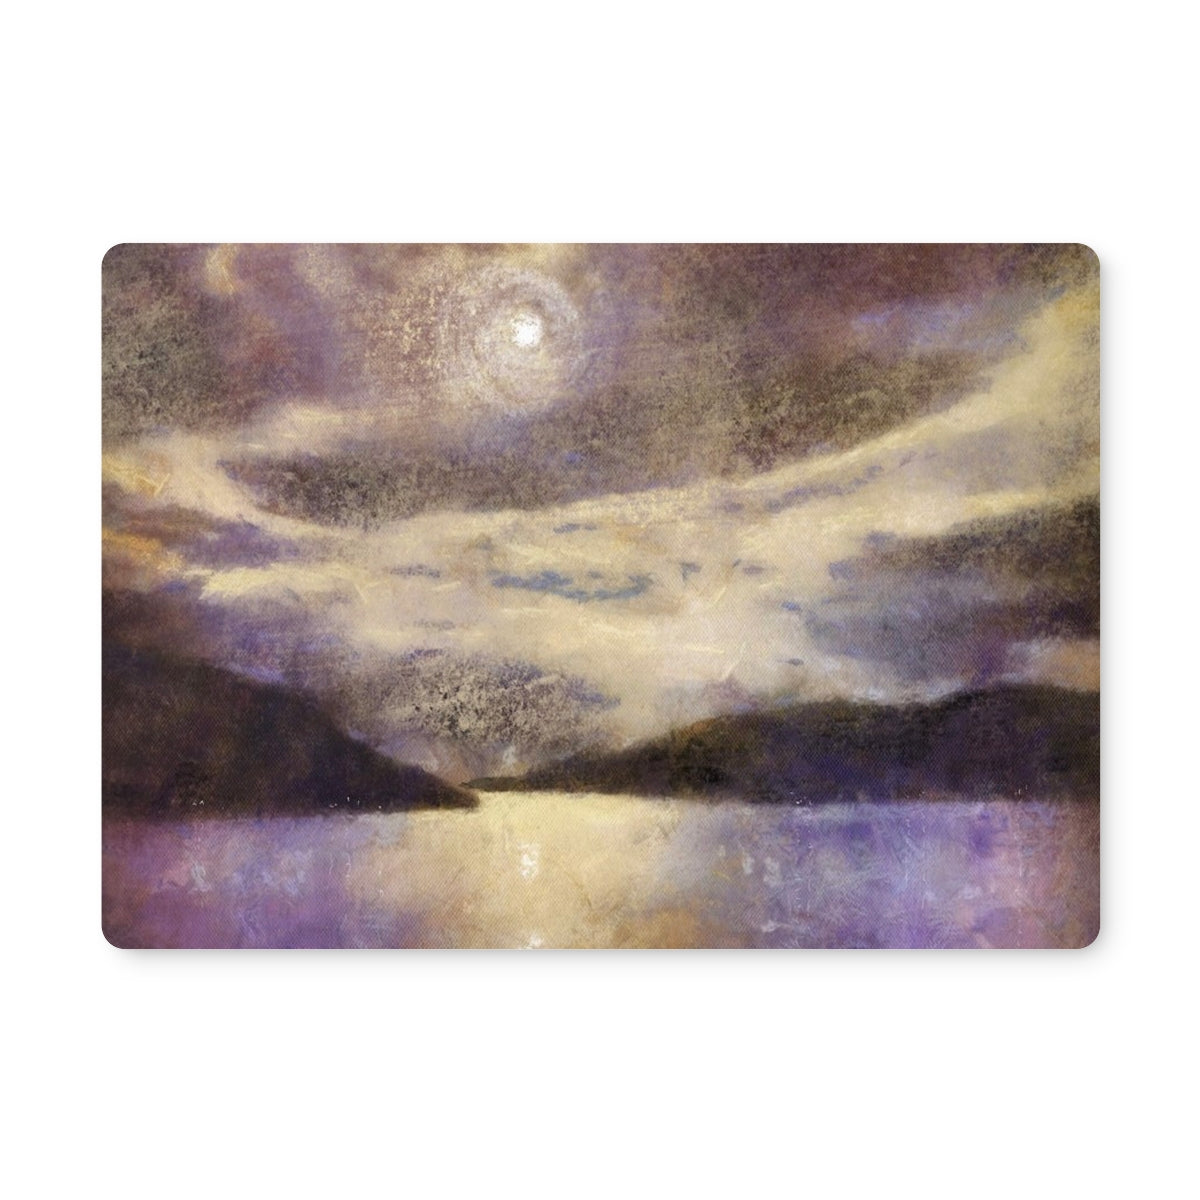 Moonlight Meets Lewis & Harris Art Gifts Placemat-Placemats-Hebridean Islands Art Gallery-Single Placemat-Paintings, Prints, Homeware, Art Gifts From Scotland By Scottish Artist Kevin Hunter